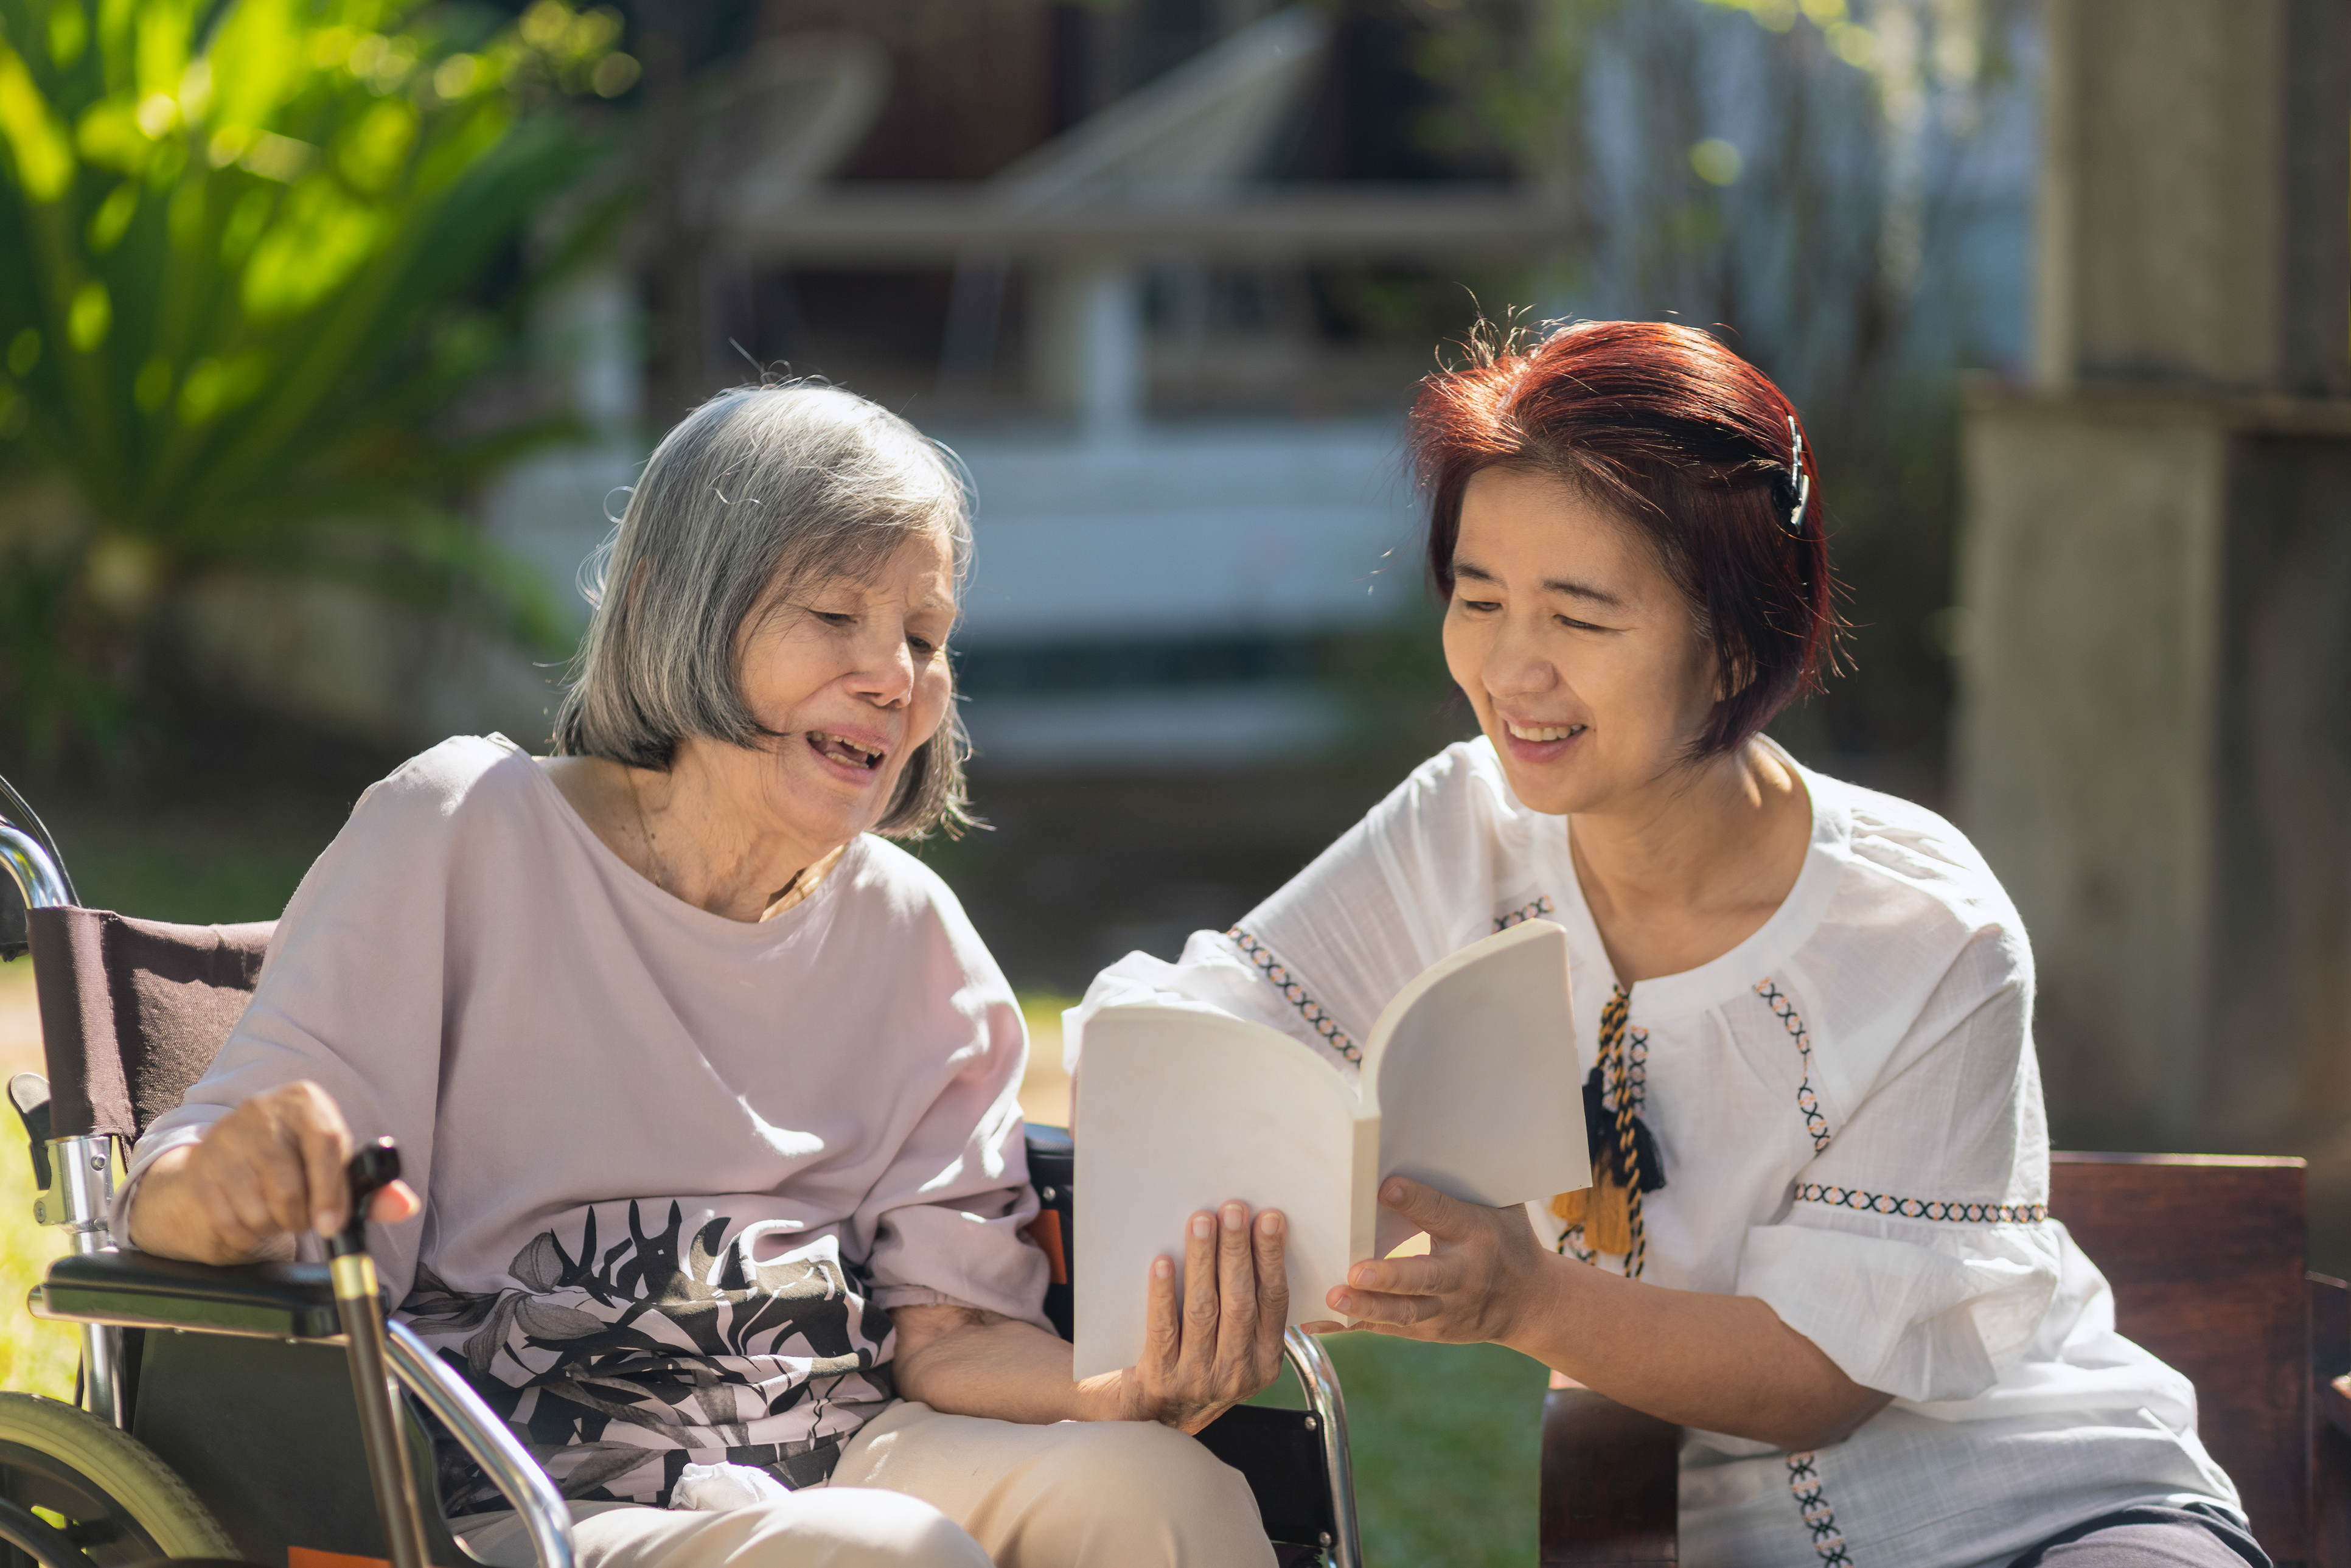 Two Asian women sit outside, the younger woman helps the elder woman read